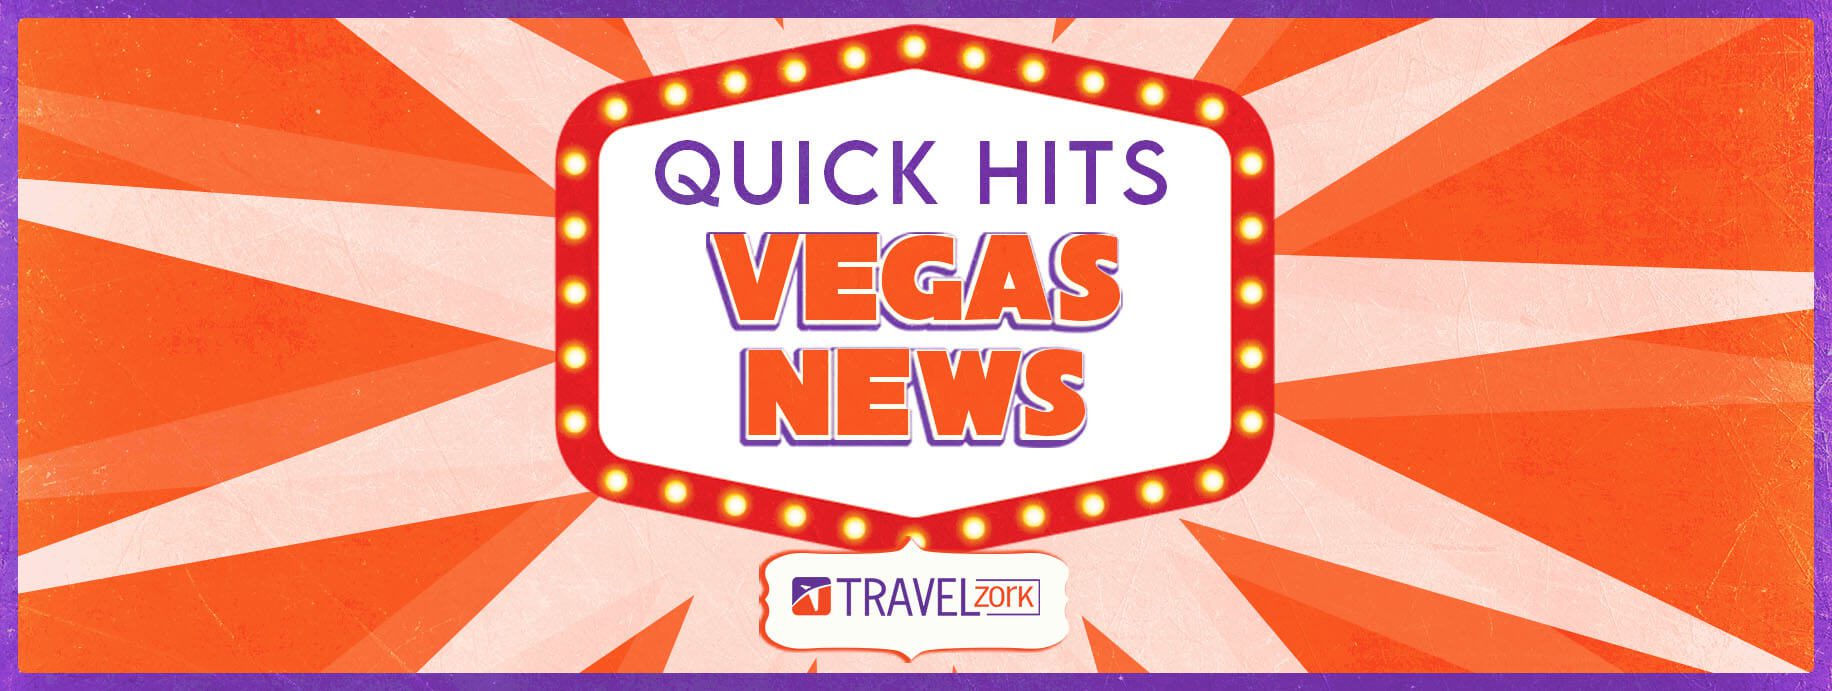 Vegas News | Details on New Palms, Riviera, And Bad Rumors